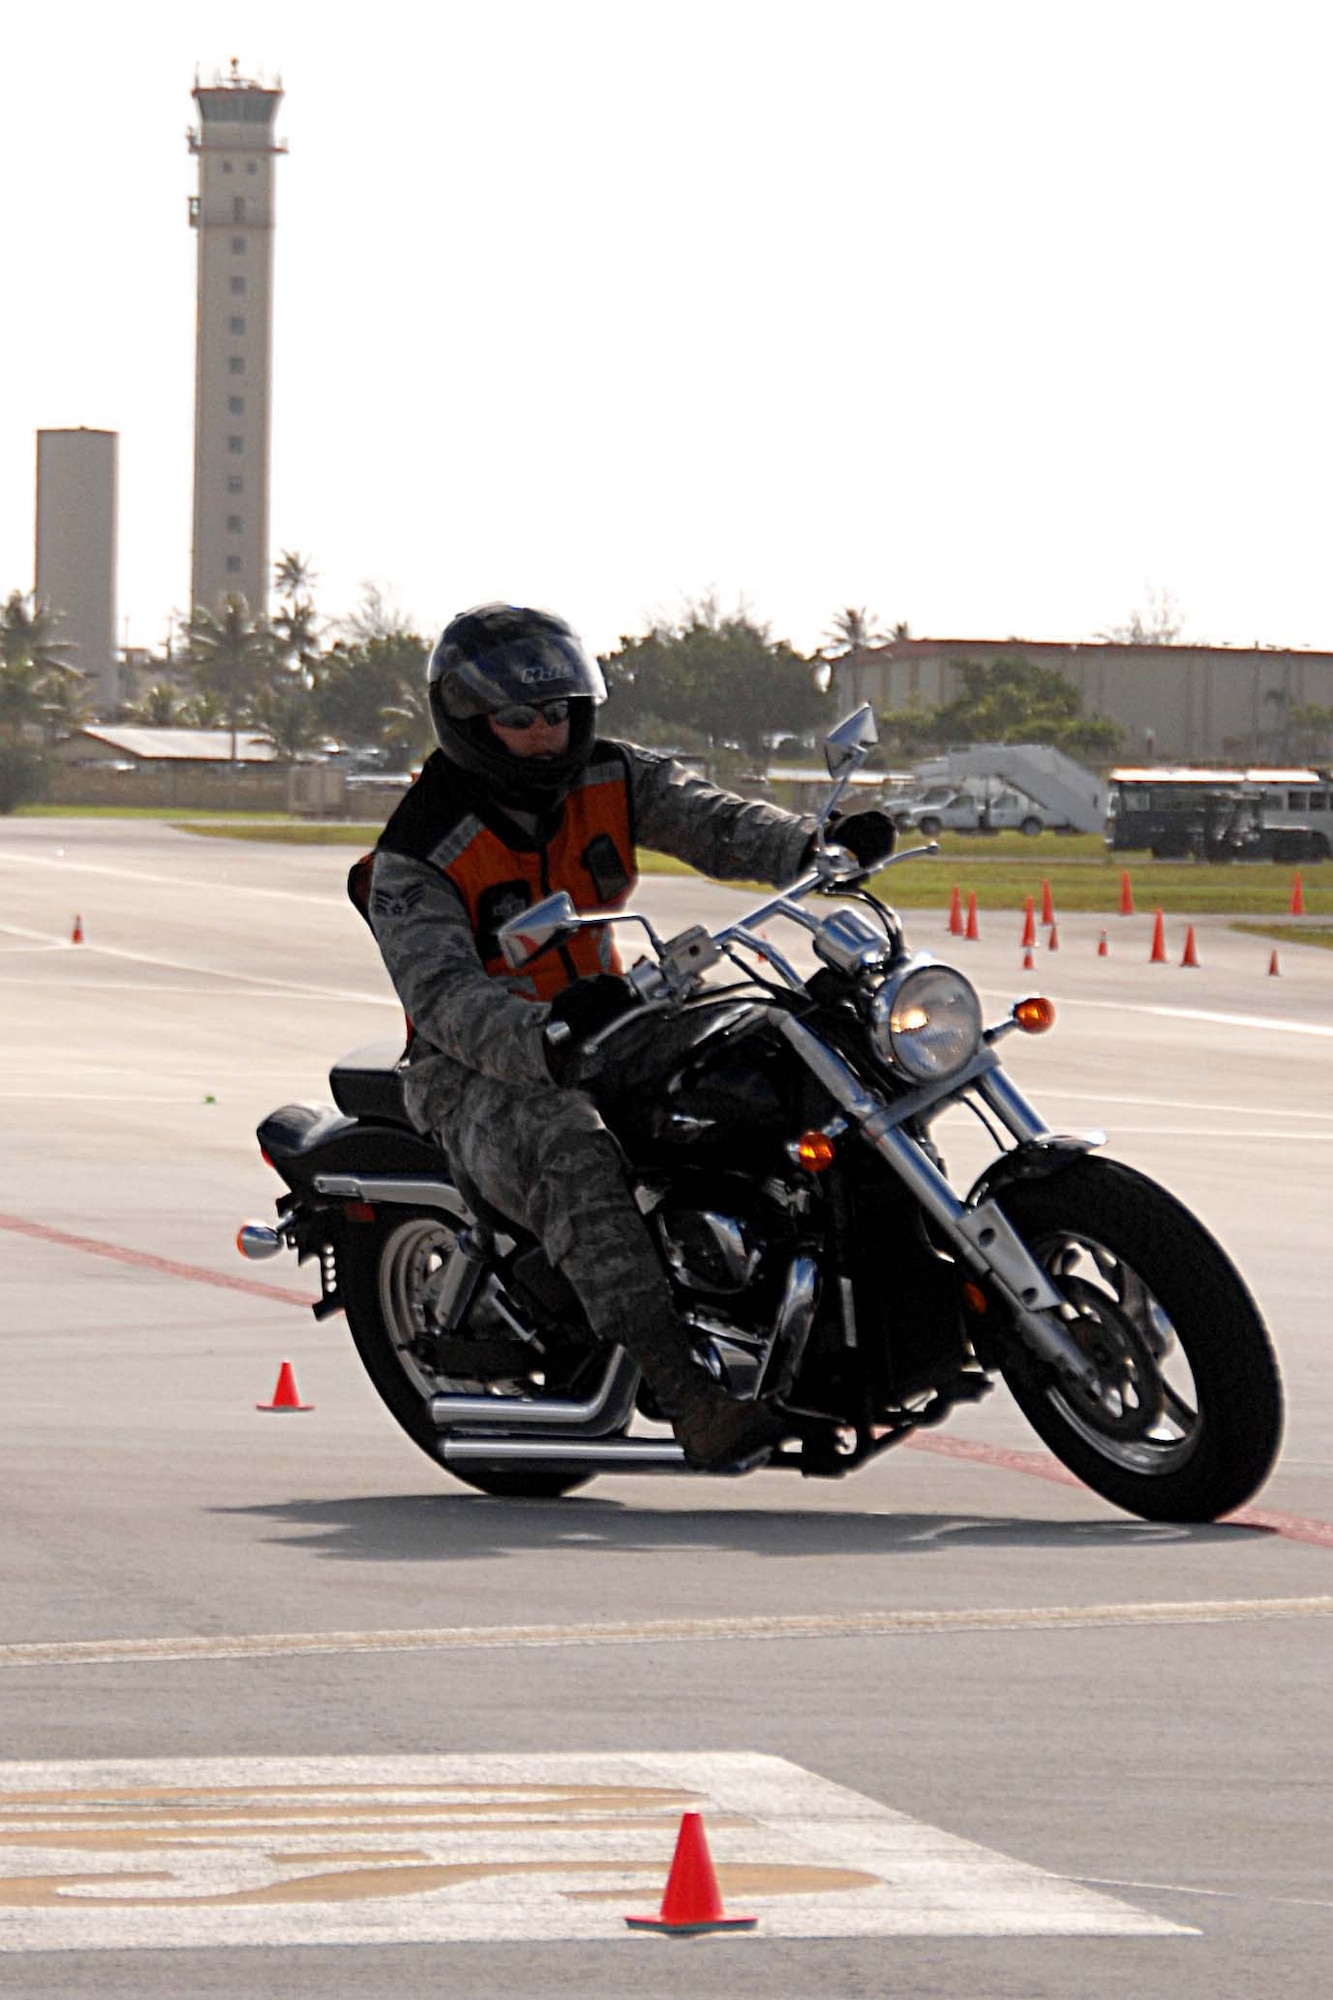 ANDERSEN AIR FORCE BASE, Guam -- A rider shows off what he learned during the Advanced Rider Track Day event on the Andersen flightline July 27. The 13th Air Force, 36th Wing and Joint Region Marianas safety offices worked together to bring the CSBS here to teach Guam motorcycle riders how to safely execute a turn at realistic speeds. (U.S. Air Force photo by Airman 1st Class Anthony Jennings)